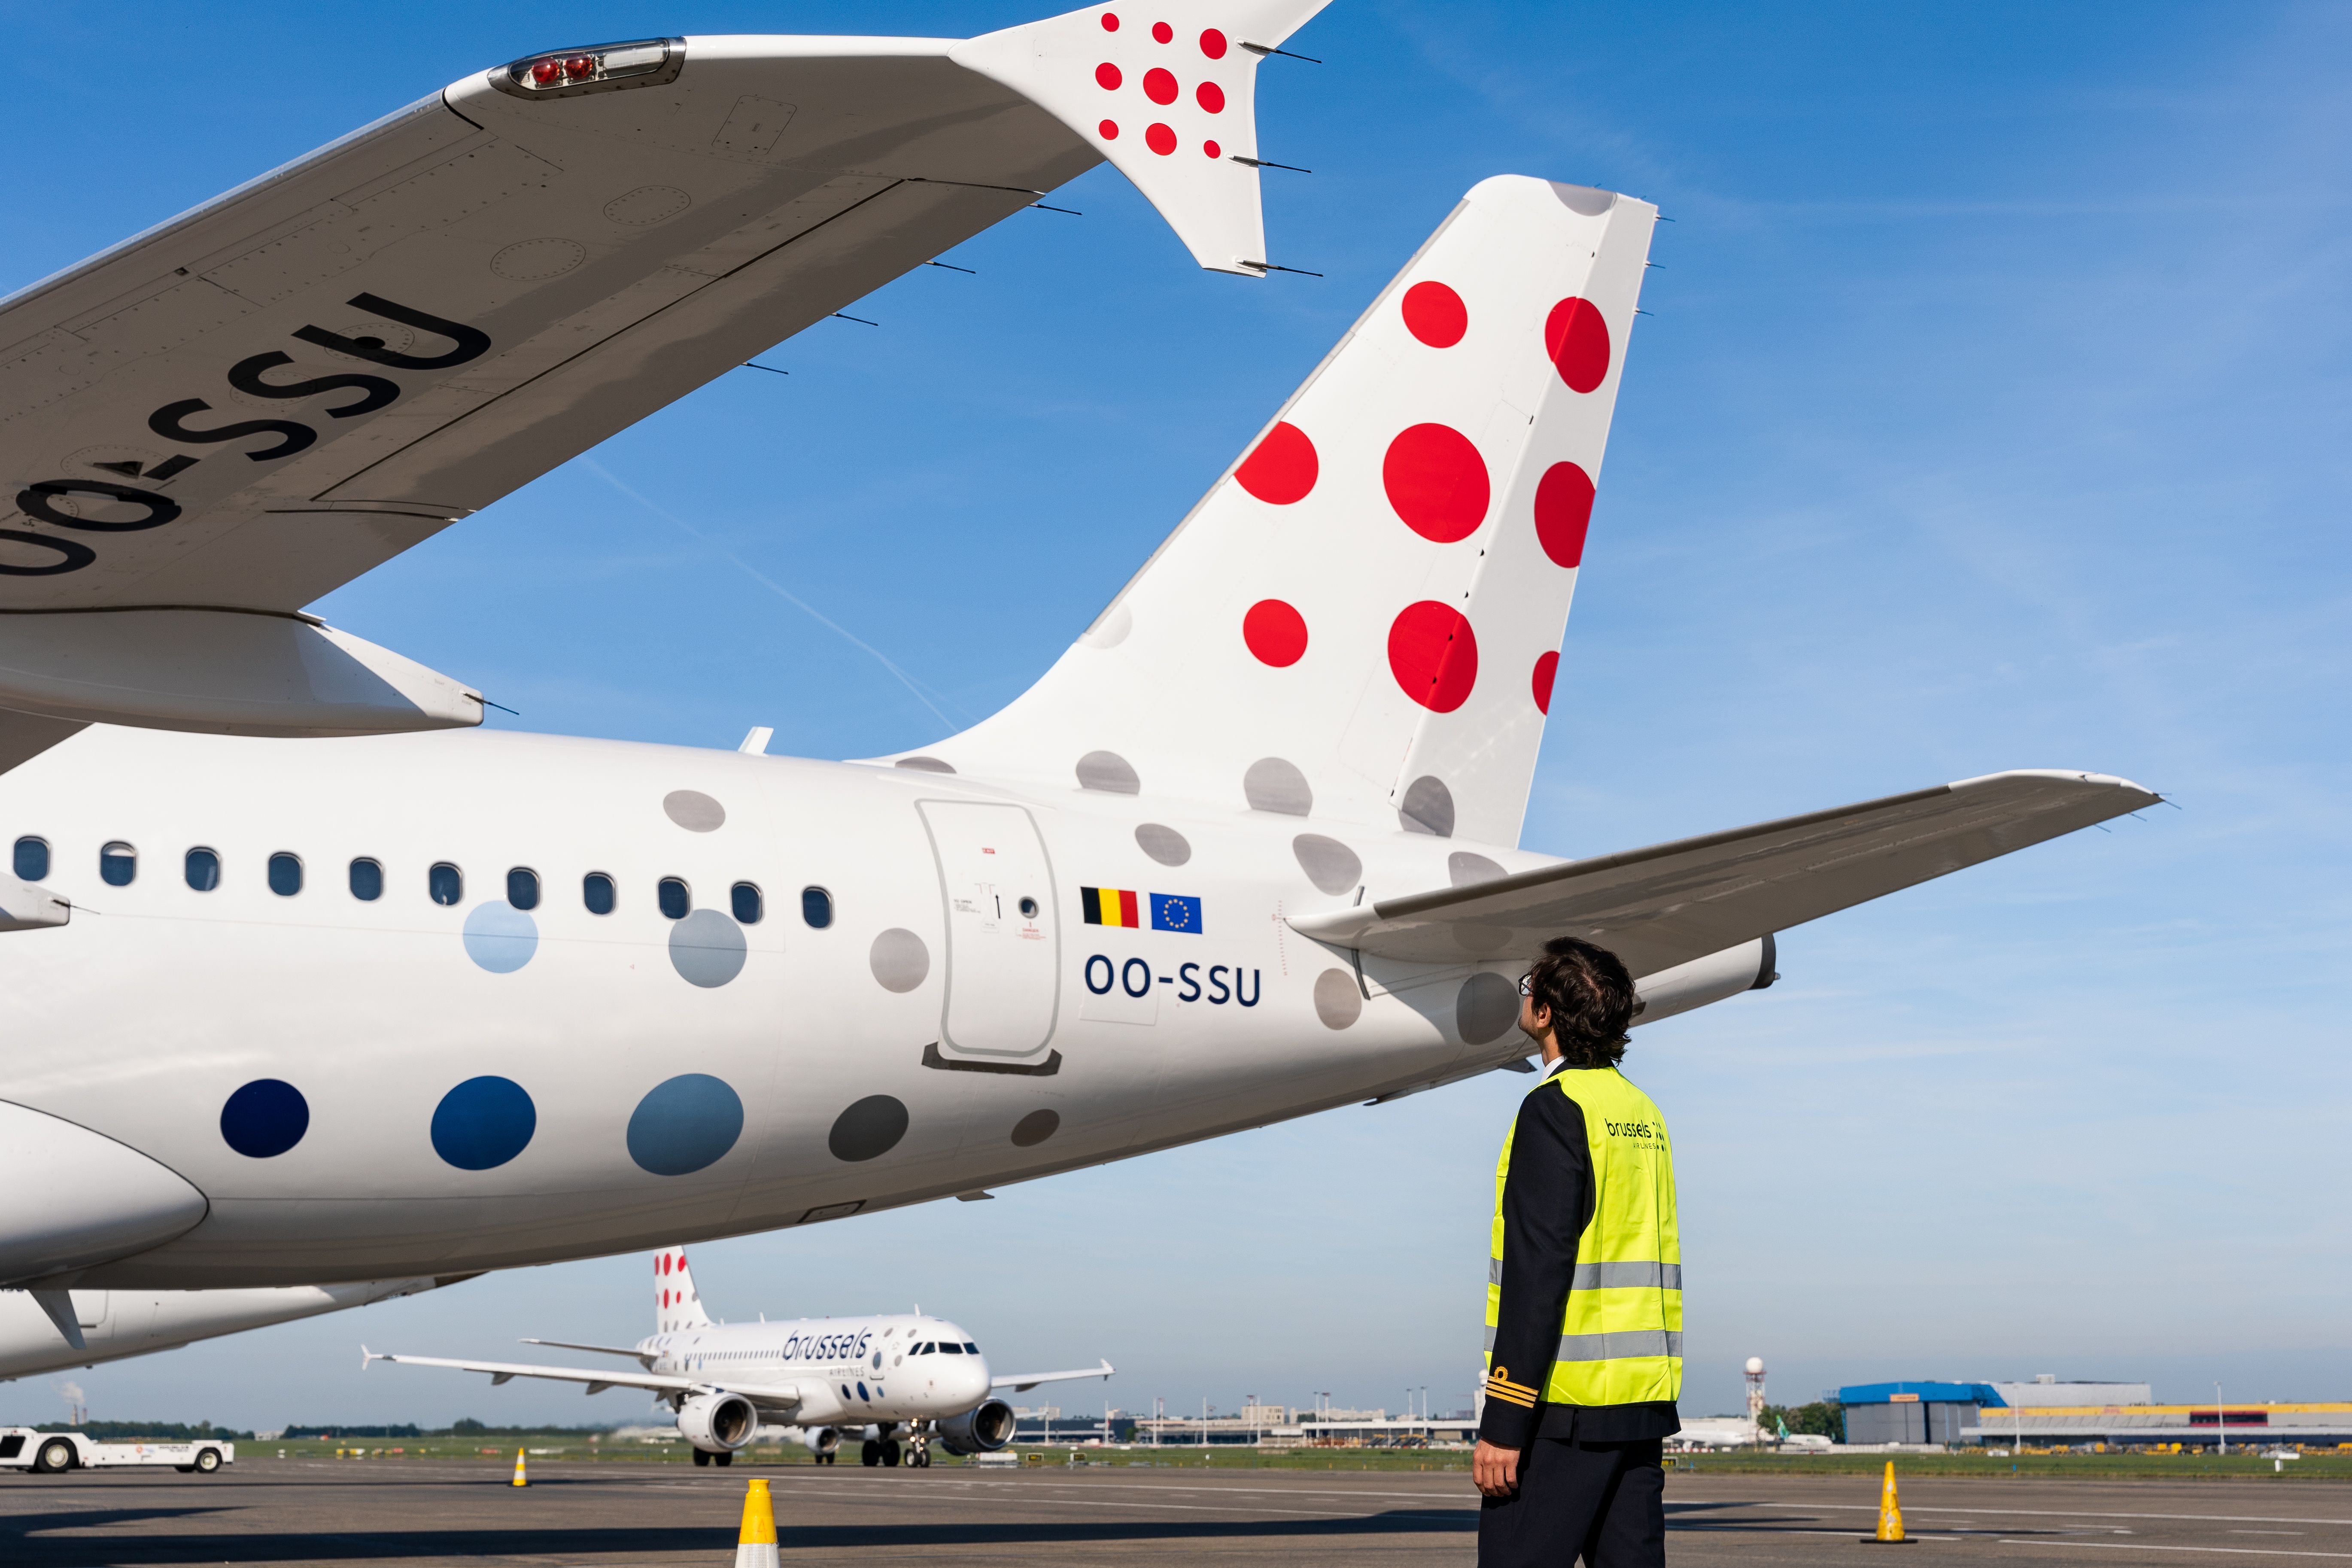 300 Brussels Airlines Flights Canceled Due To Strike Action This Week